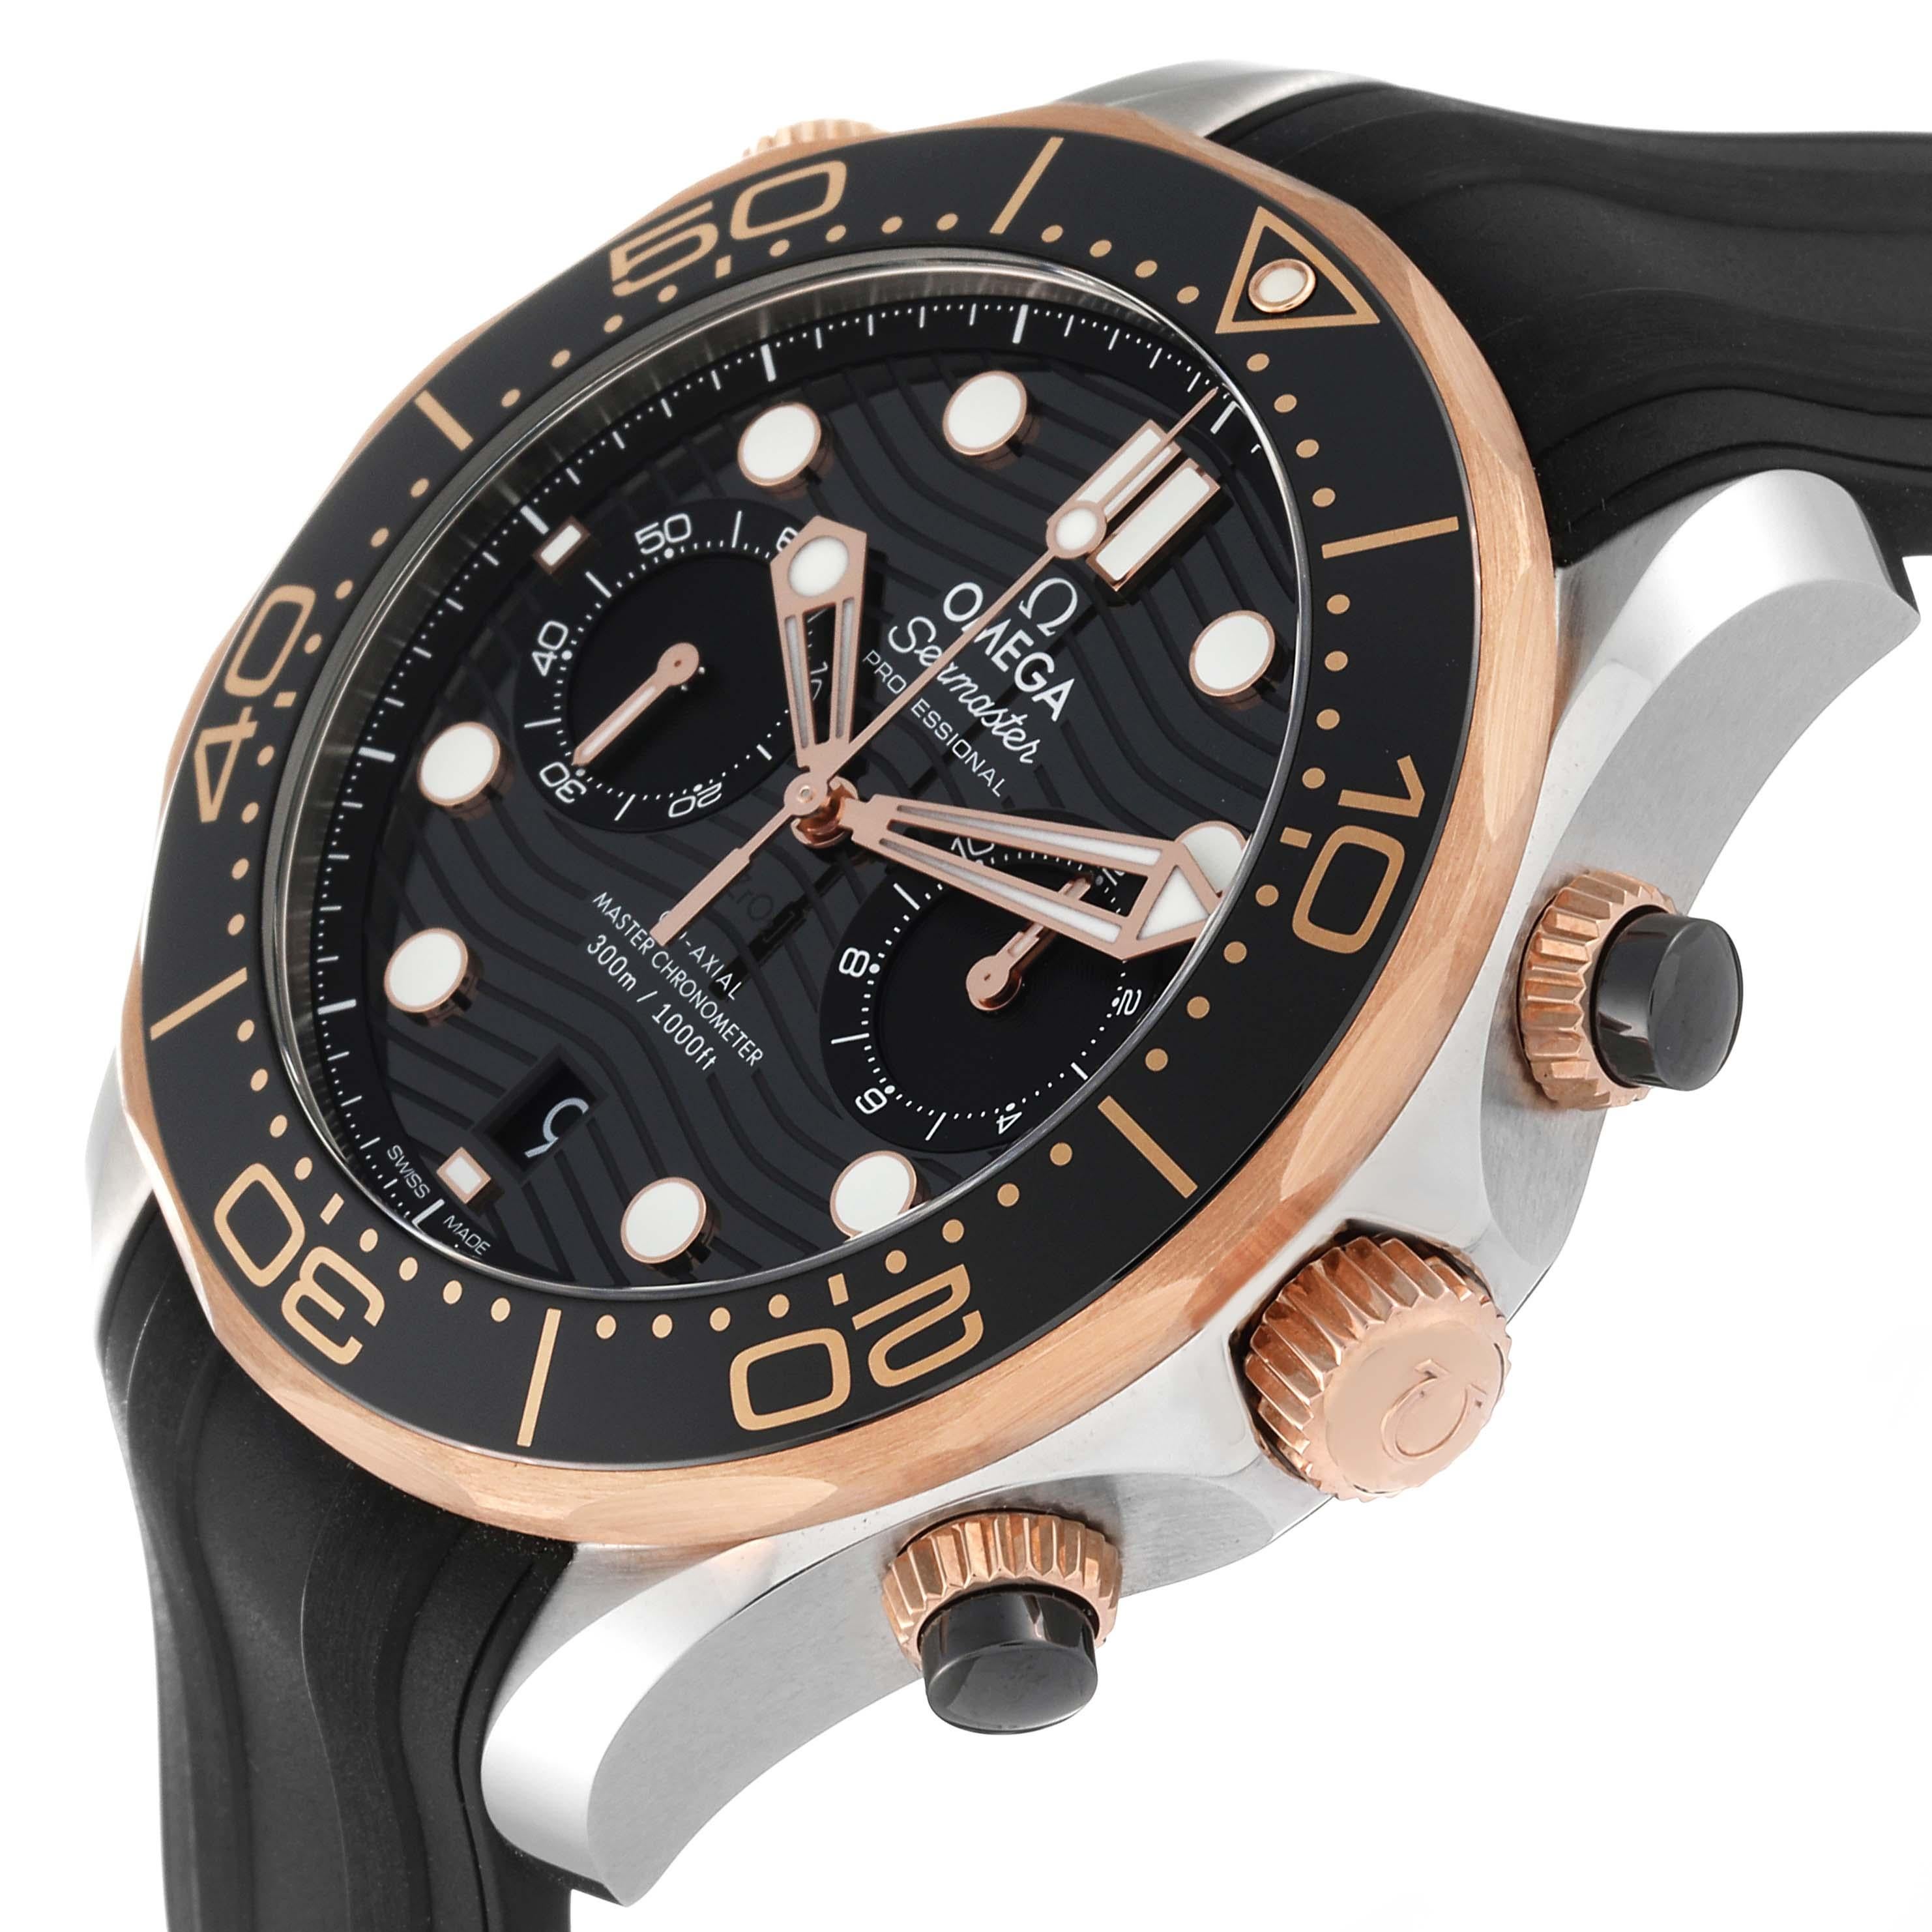 Omega Seamaster Diver Steel Rose Gold Mens Watch 210.22.44.51.01.001 Box Card. Automatic self-winding chronograph movement with column wheel and Co-Axial escapement. Certified Master Chronometer, approved by METAS, resistant to magnetic fields